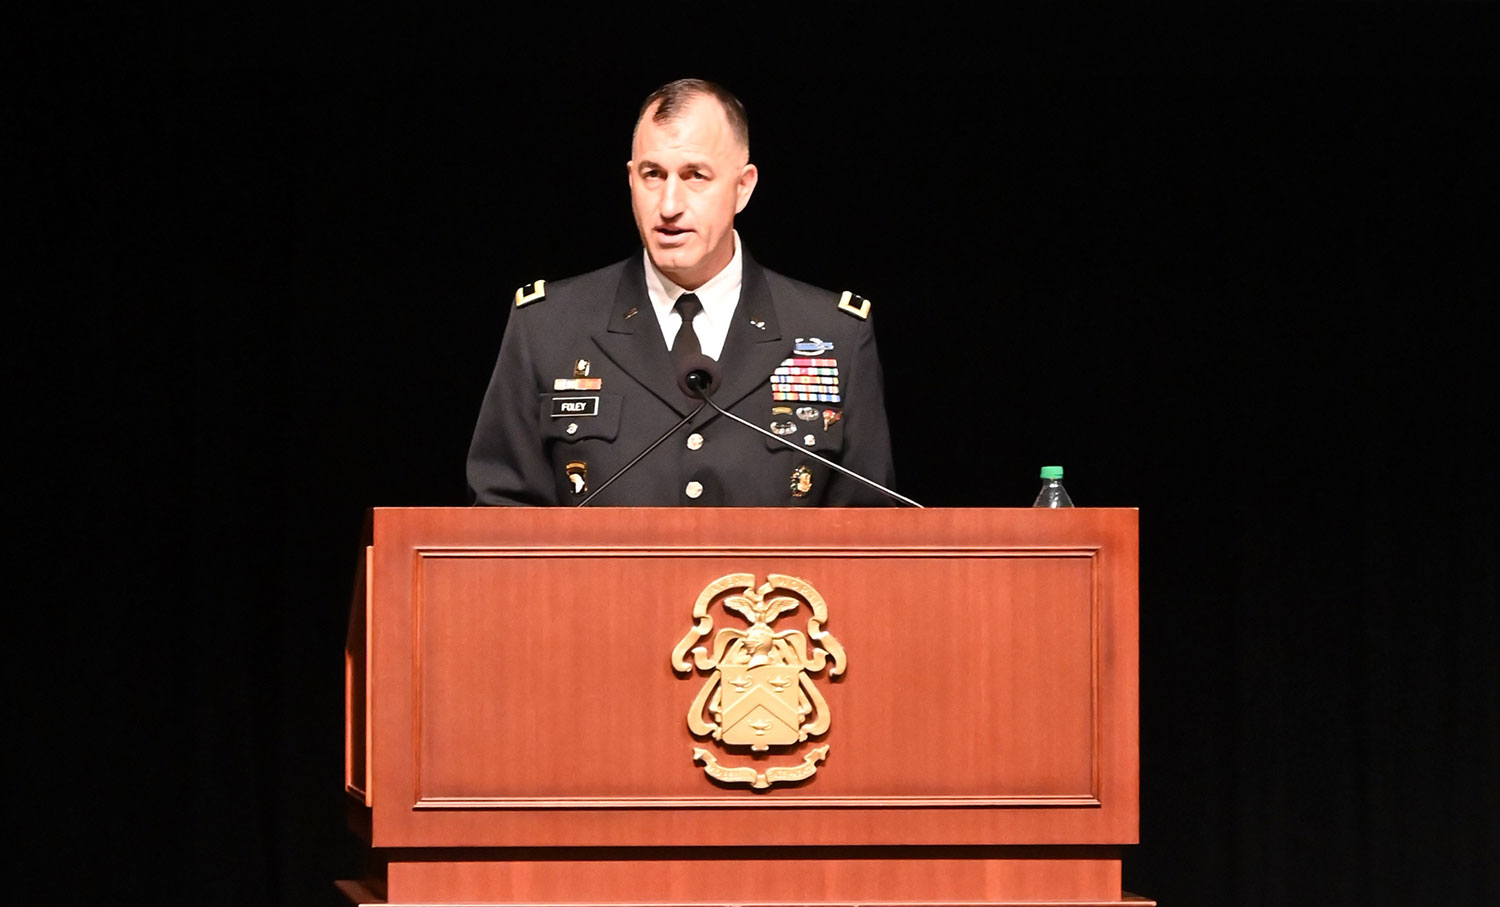 CGSC Deputy Commandant Brig. Gen. David Foley delivers remarks during the 2023 International Flag Ceremony on Aug. 8, 2022 in the Eisenhower Auditorium of the Lewis and Clark Center.